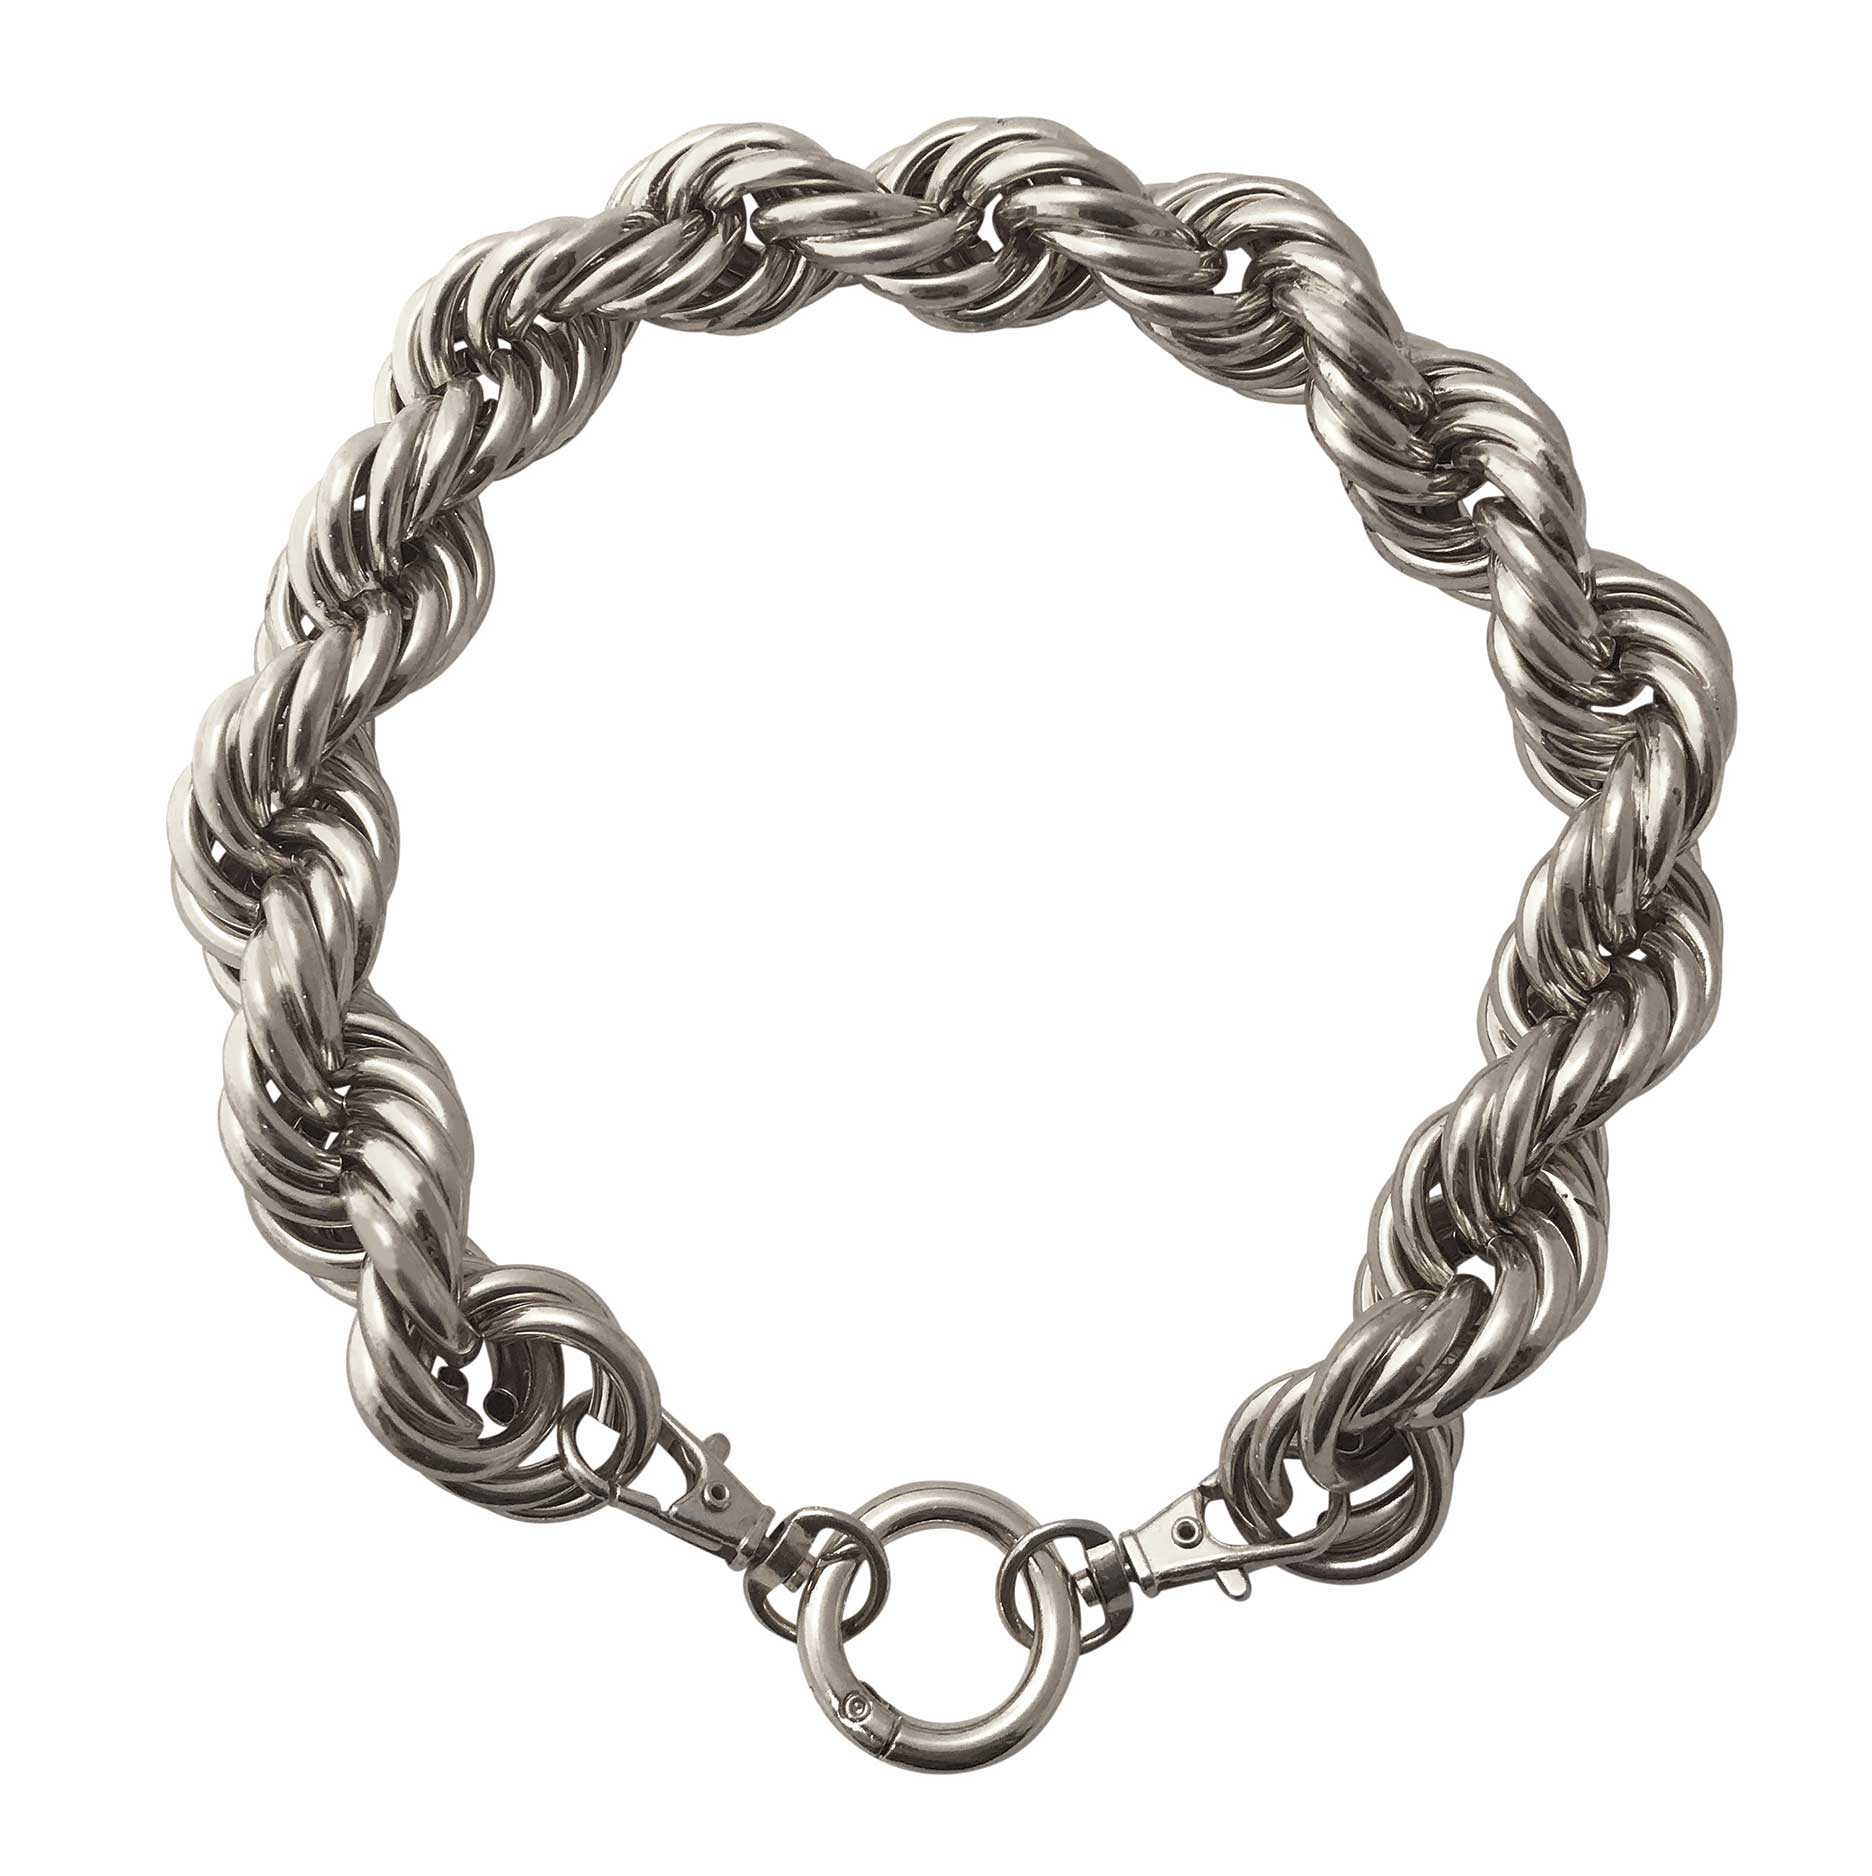 Rope Chain Dog Collar "The Dookie" in Silver